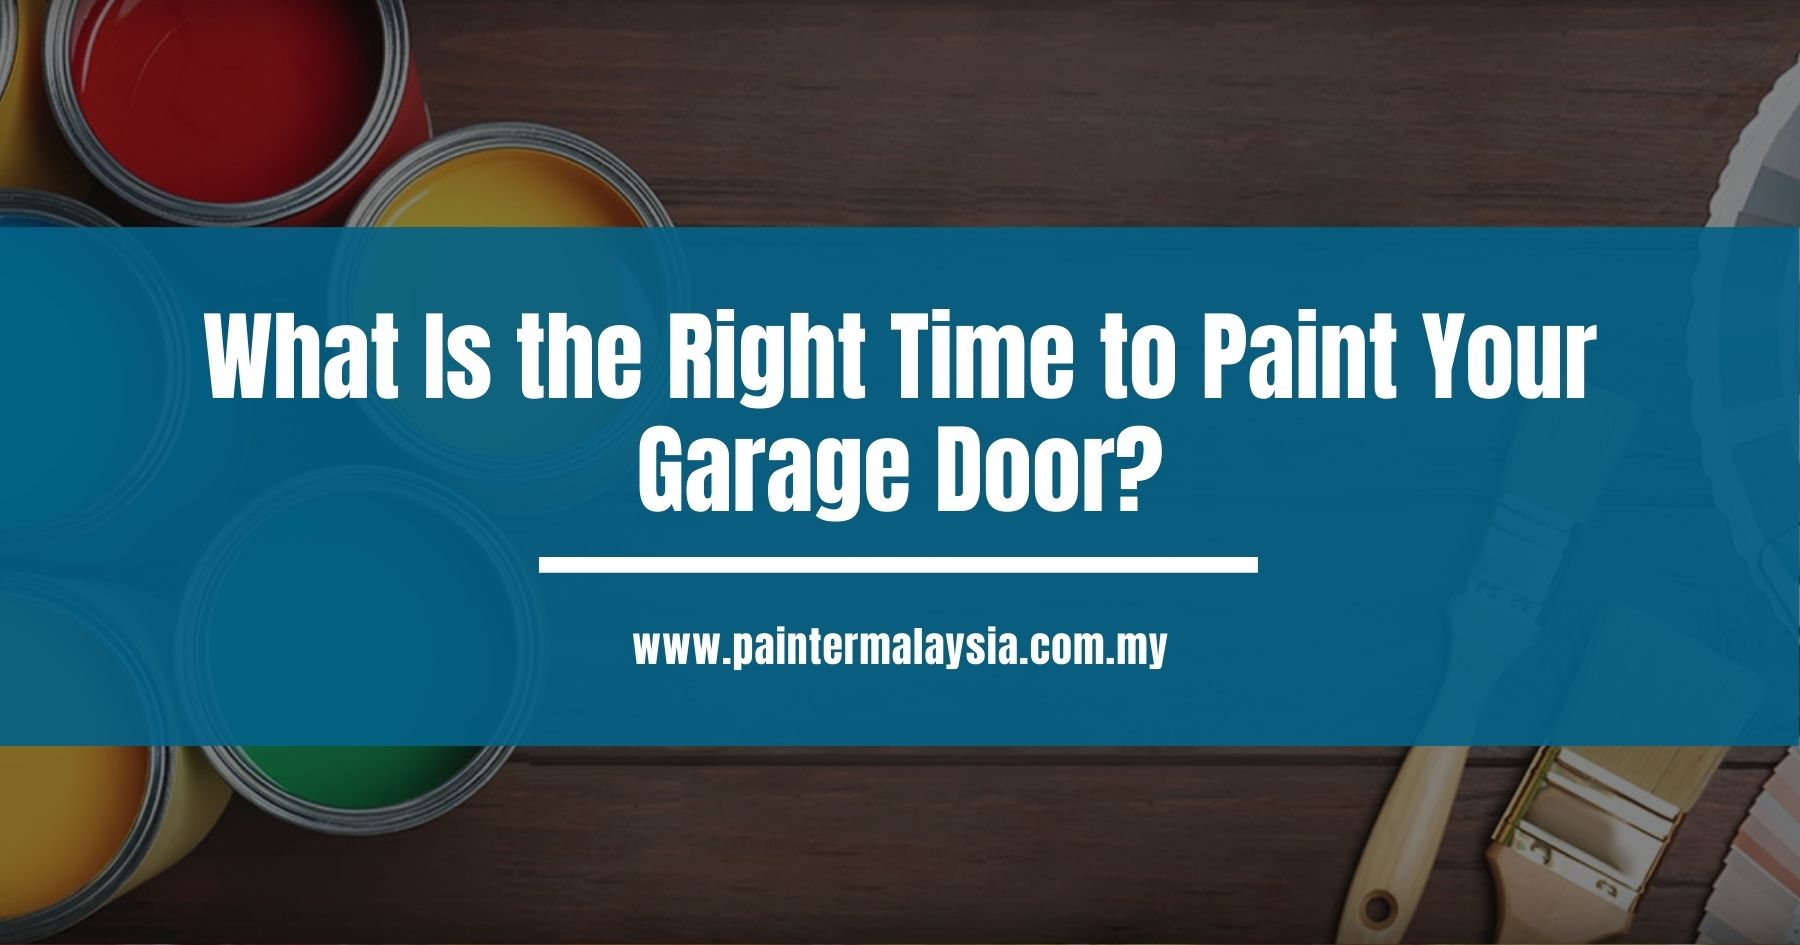 What Is the Right Time to Paint Your Garage Door?